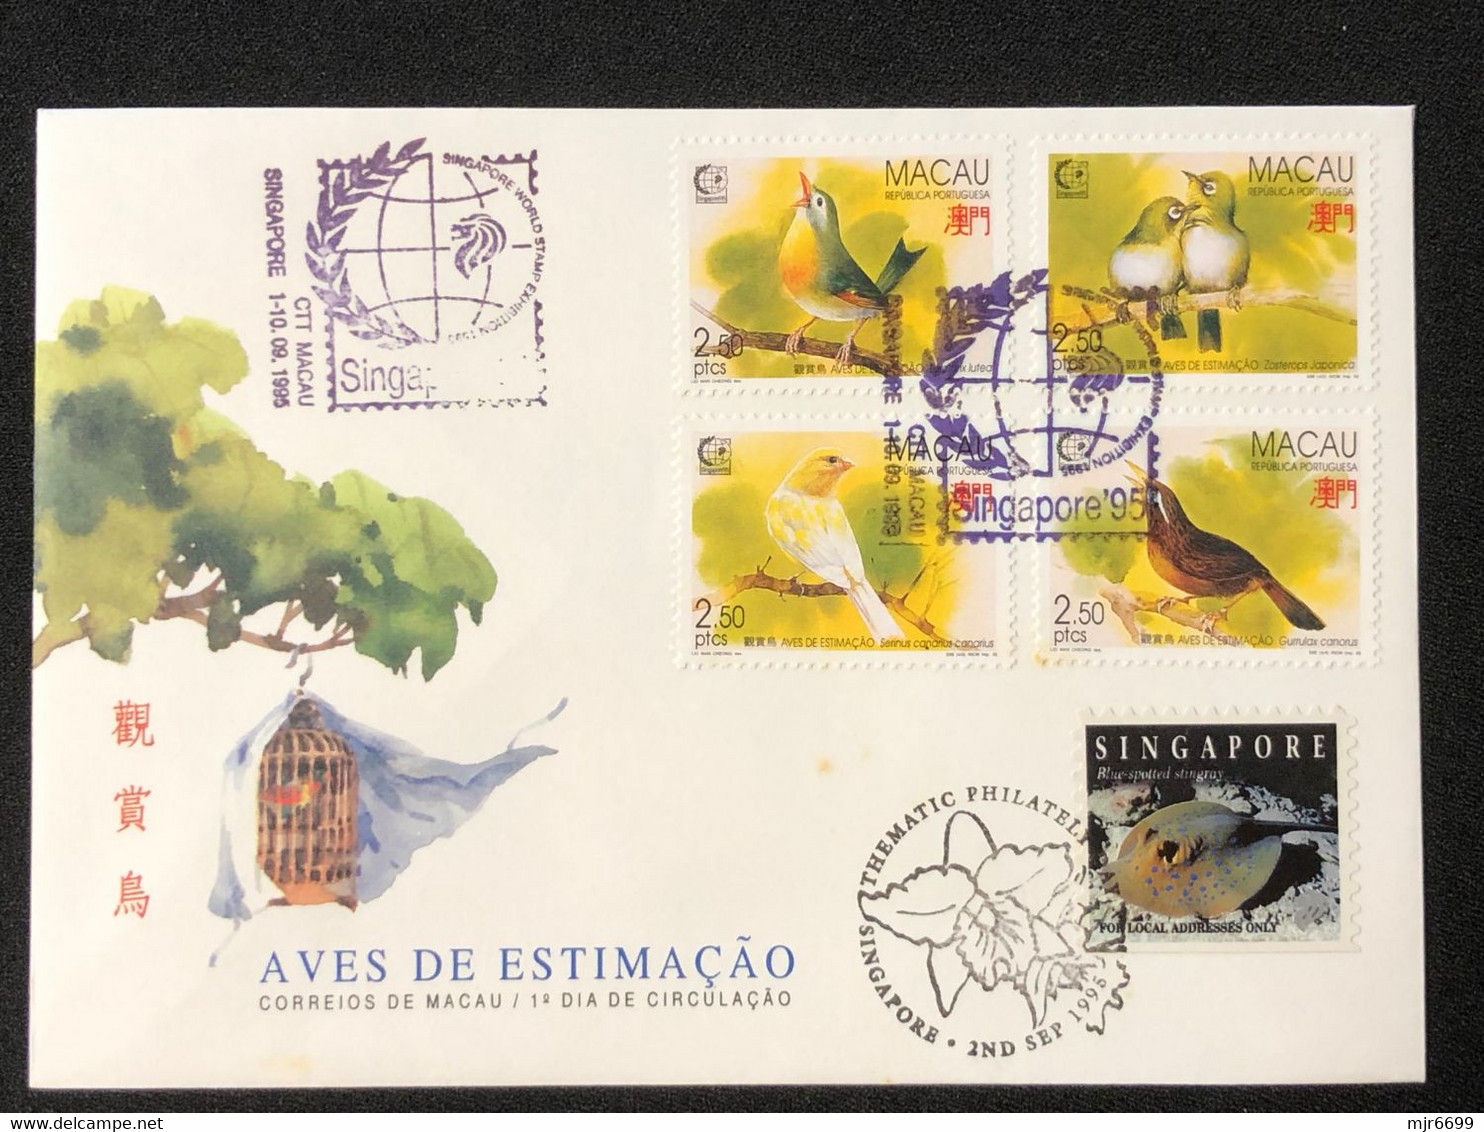 MACAU SINGAPORE WORLD STAMP EXPO 95 COMMEMORATIVE FIRST DAY COVER - Lettres & Documents